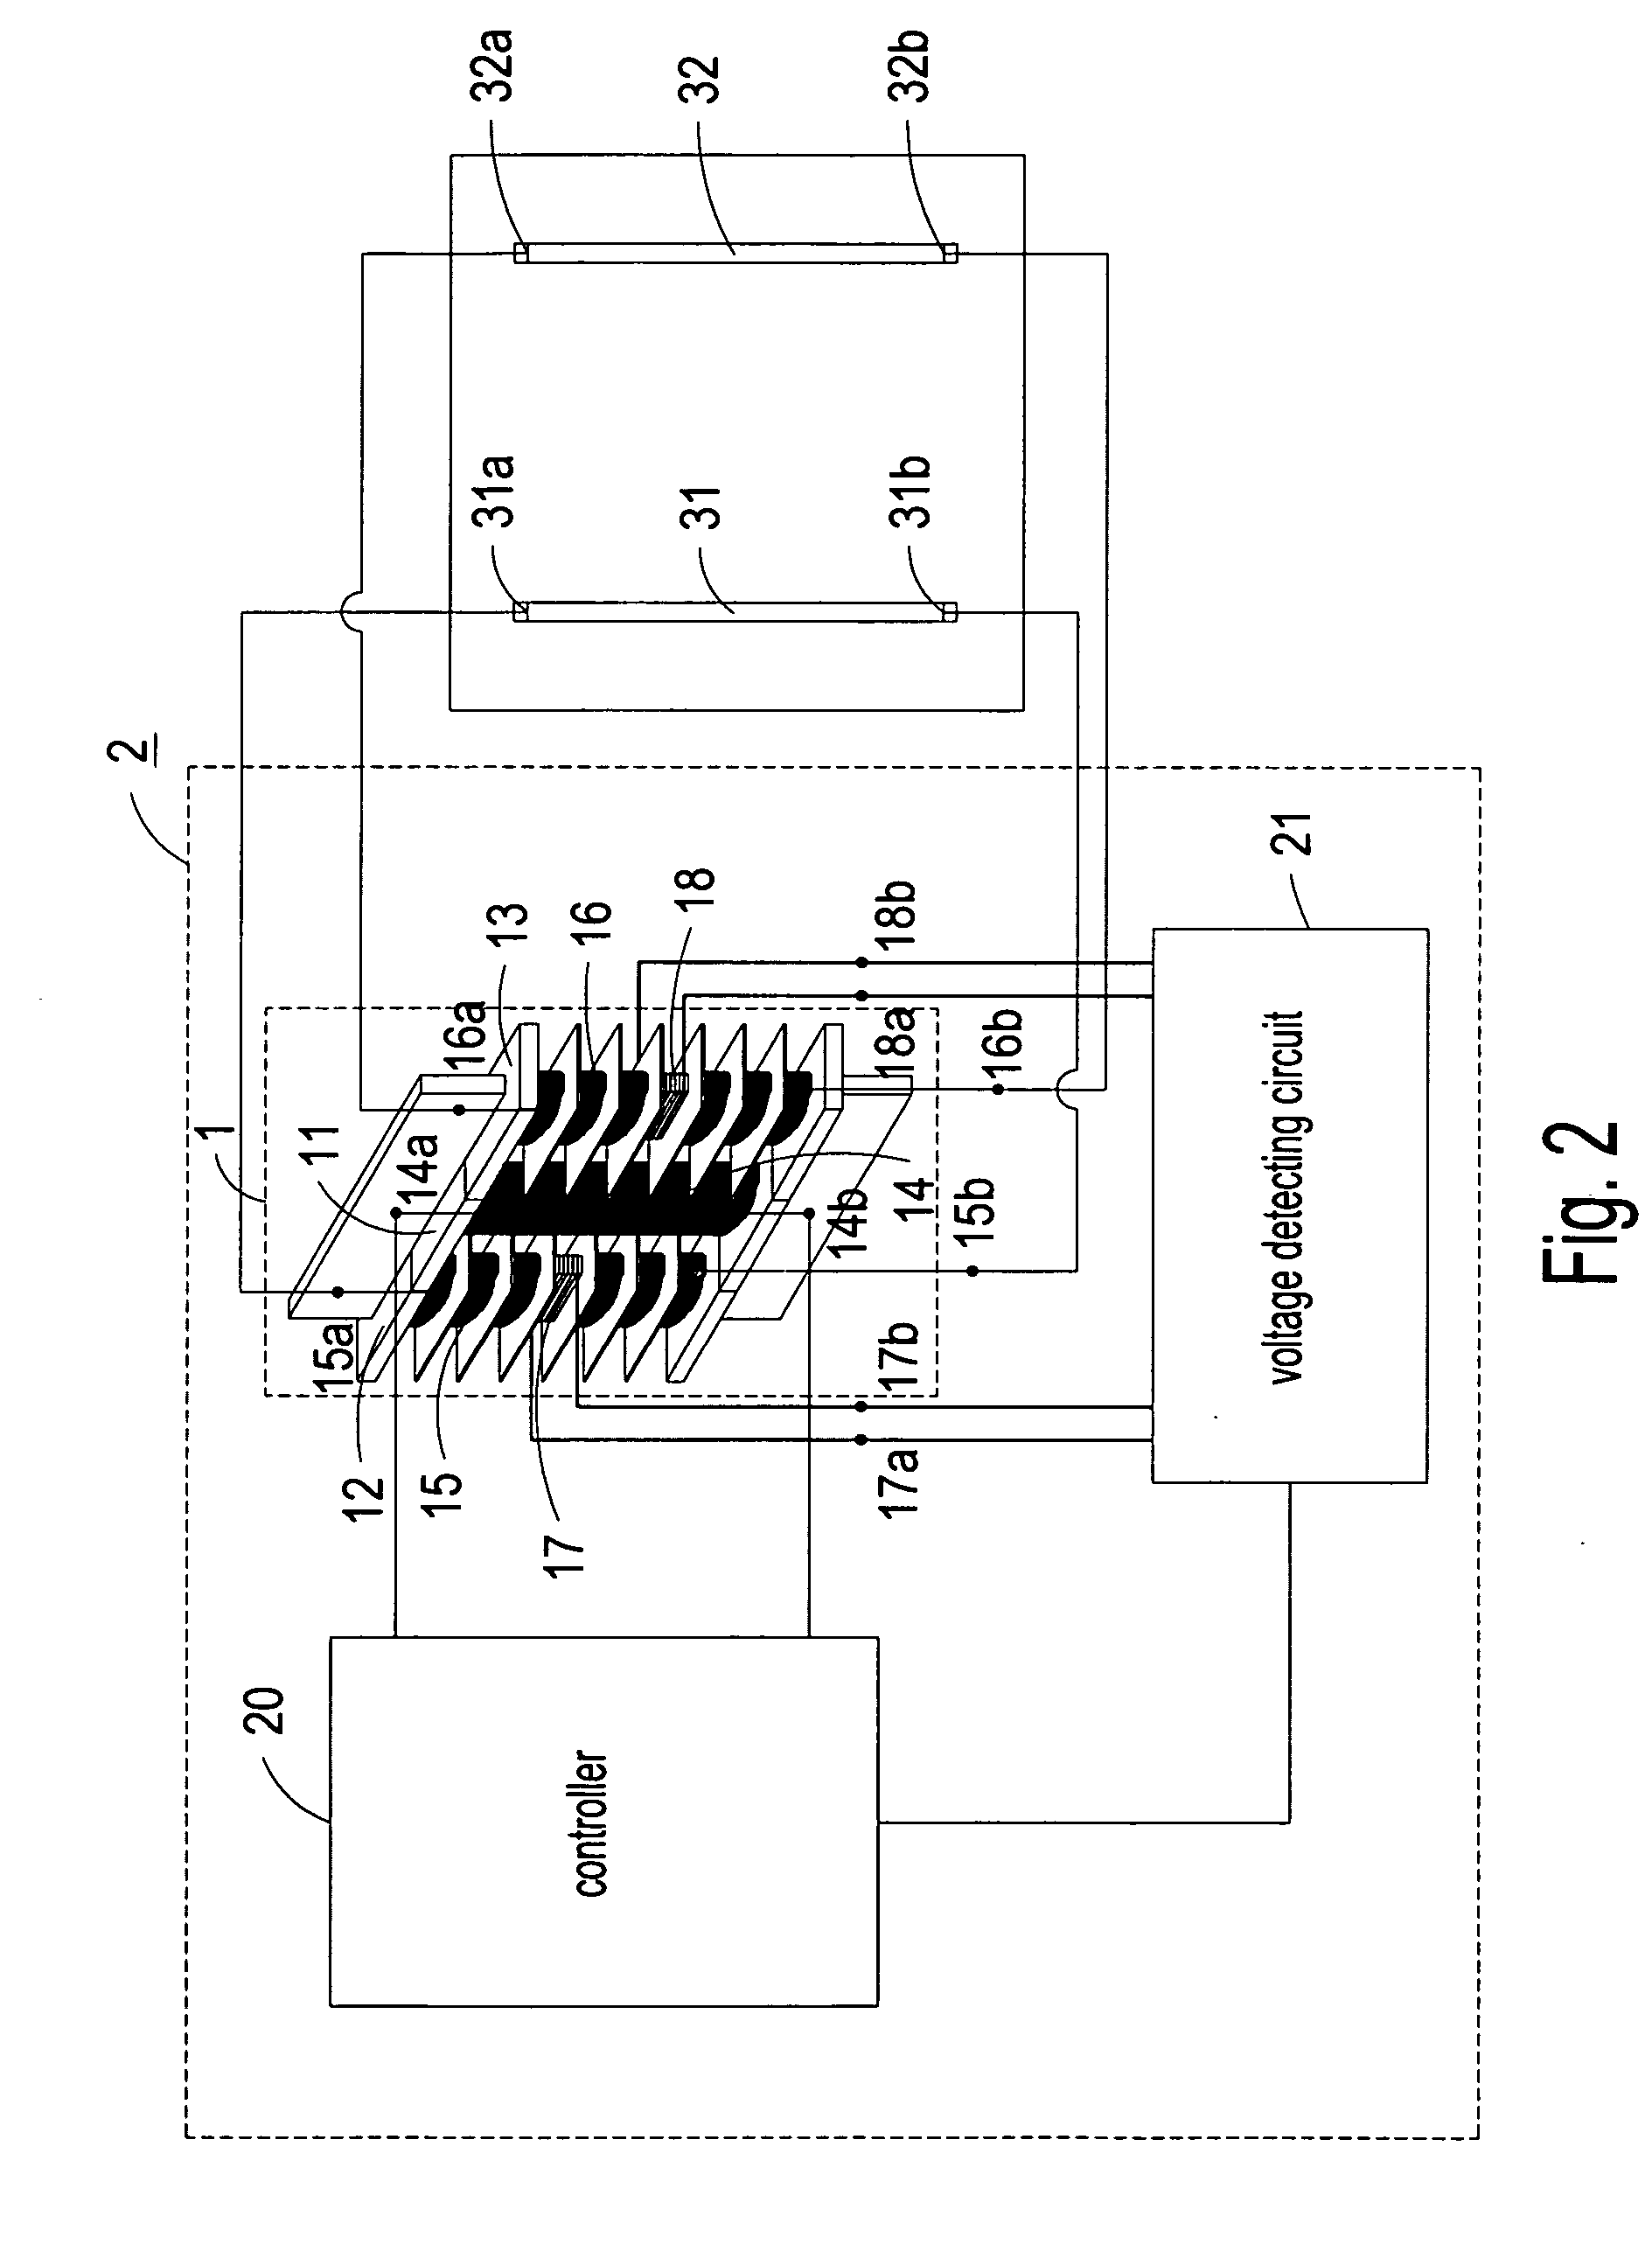 Transformer having auxiliary winding coil for sensing magnetic flux balance and driving circuit using the same